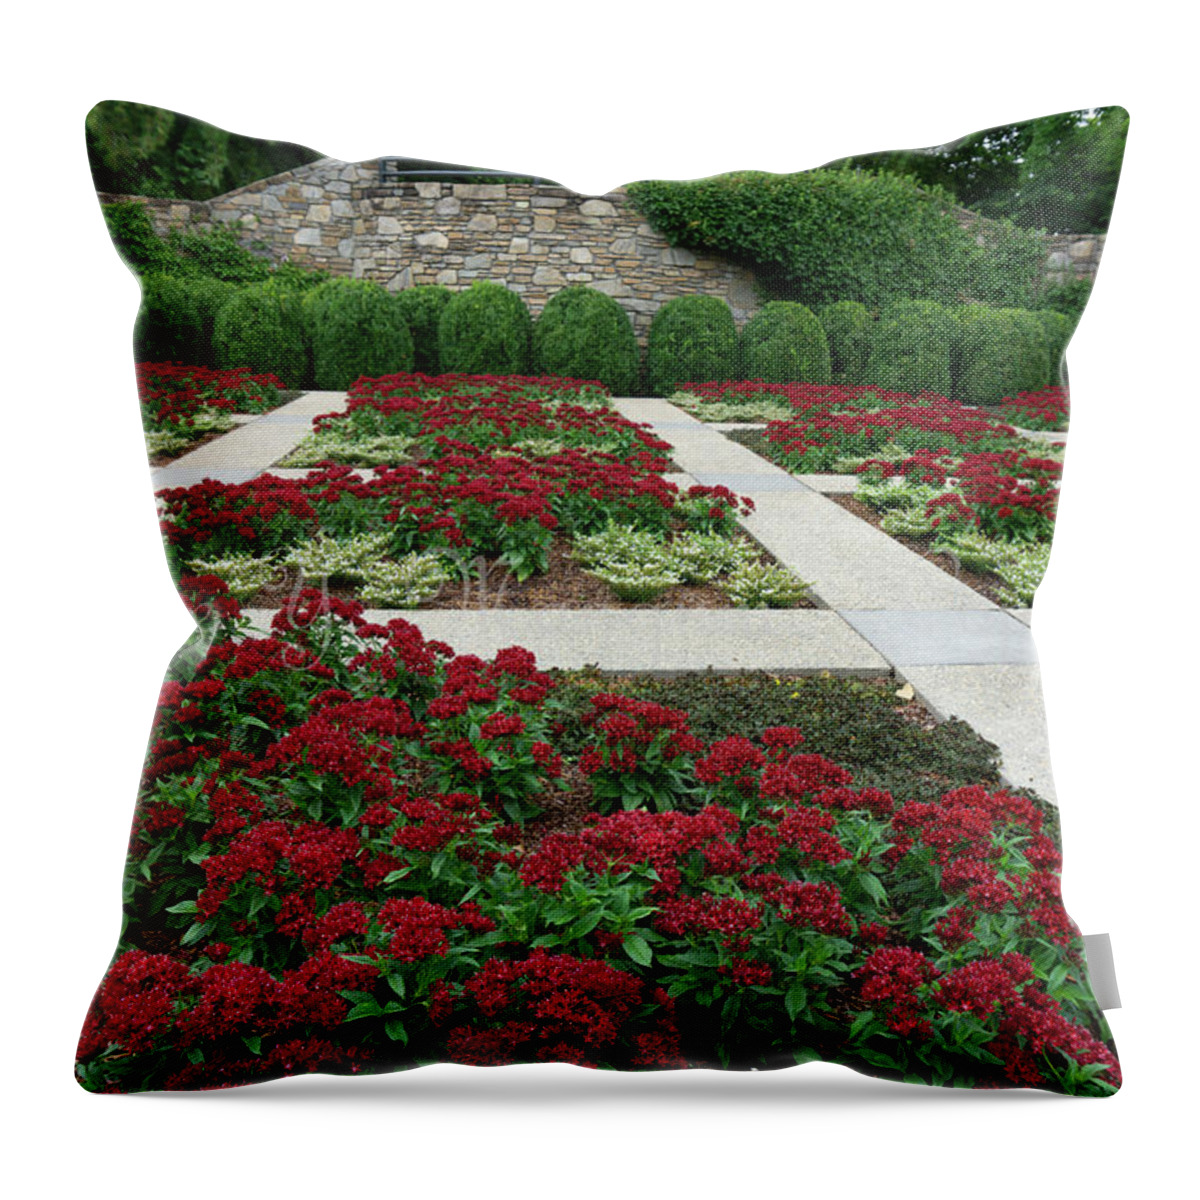 #quiltgarden#botanicals#ncarboretum#asheville#northcarolina#usa Throw Pillow featuring the photograph The Quilt Garden by Katherine Y Mangum